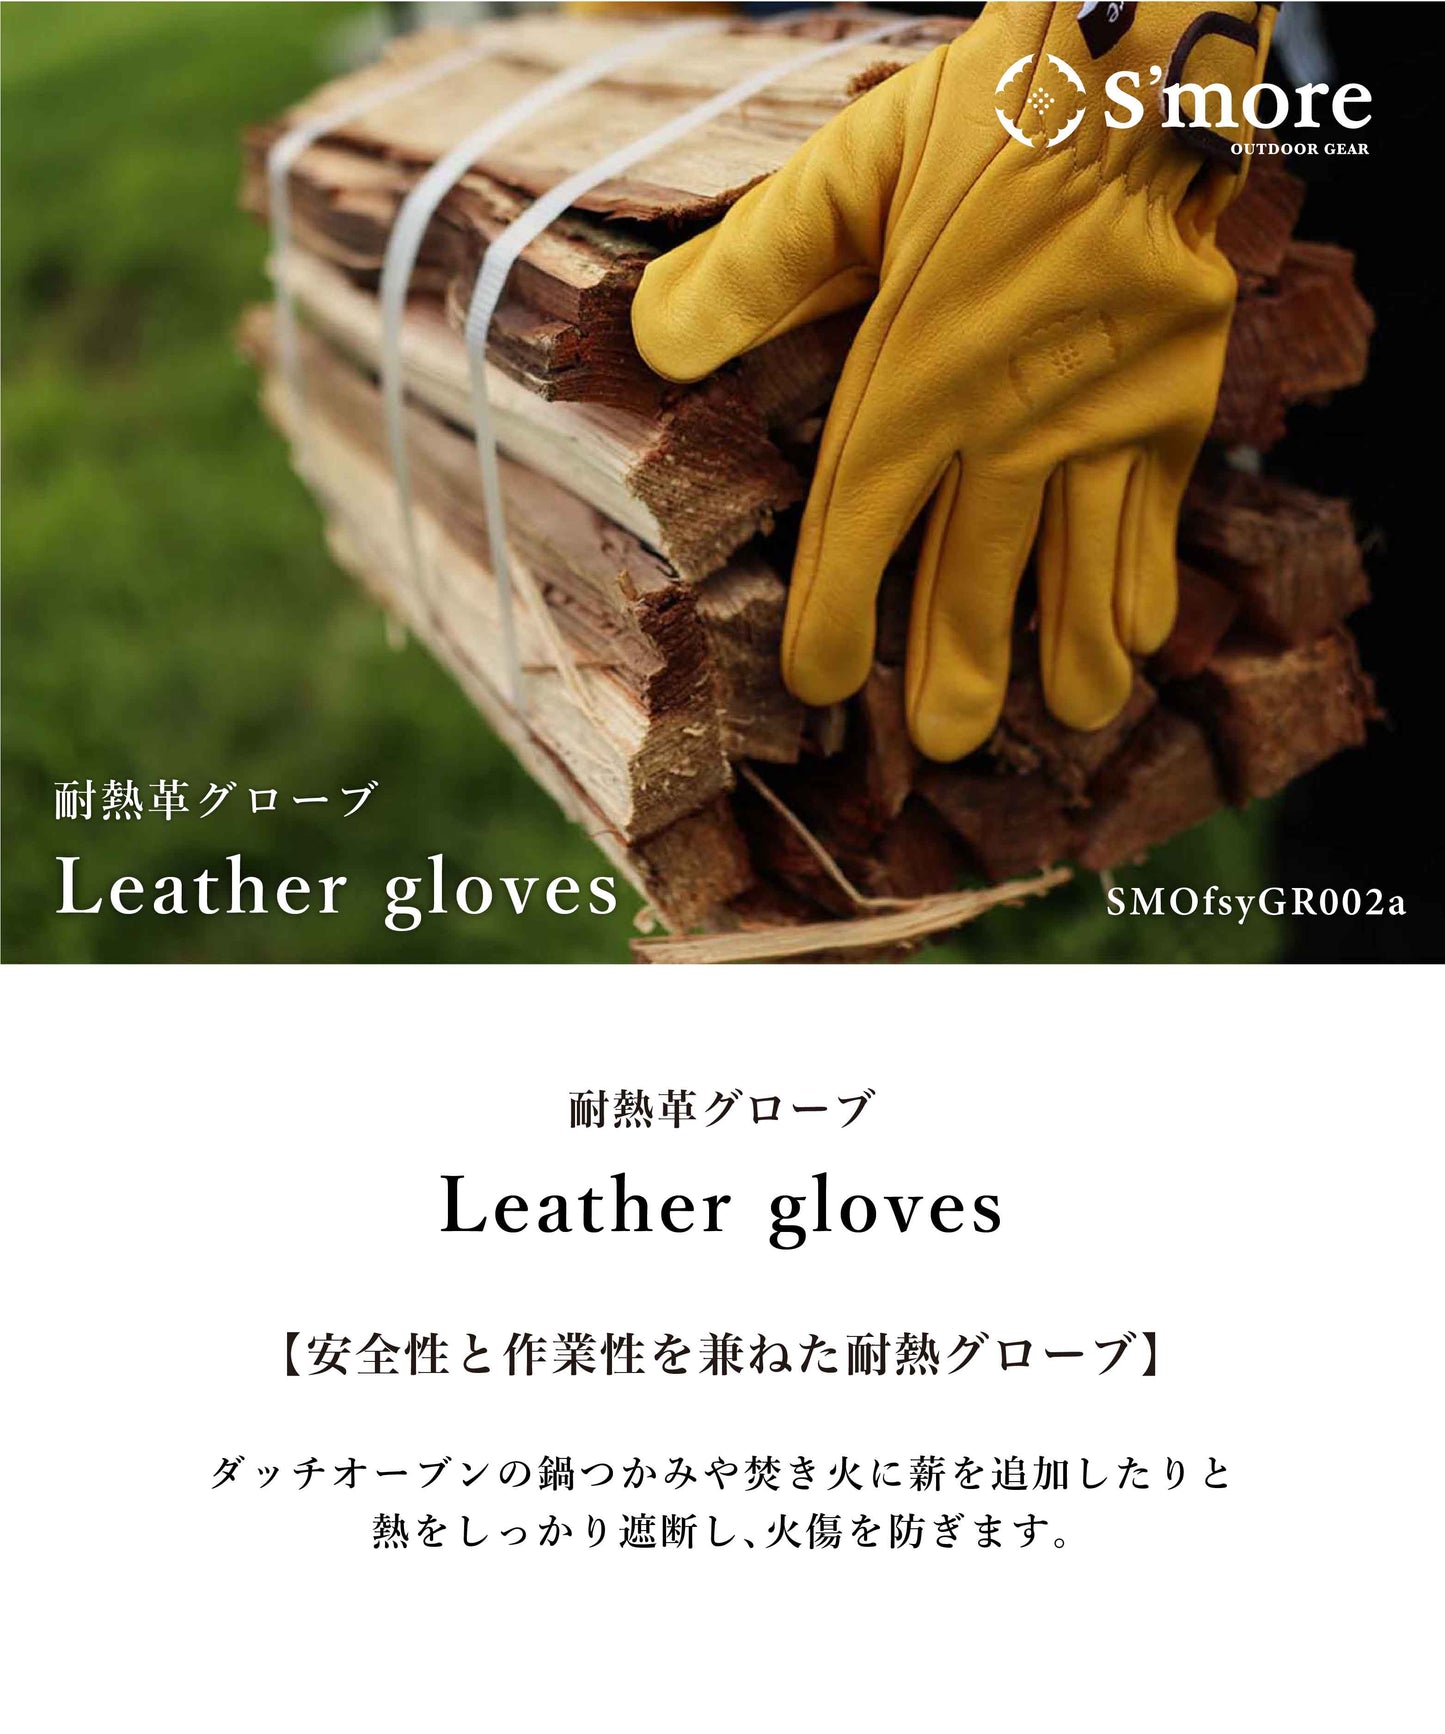 【S'more / Leather gloves 】耐火グローブ 耐熱グローブ